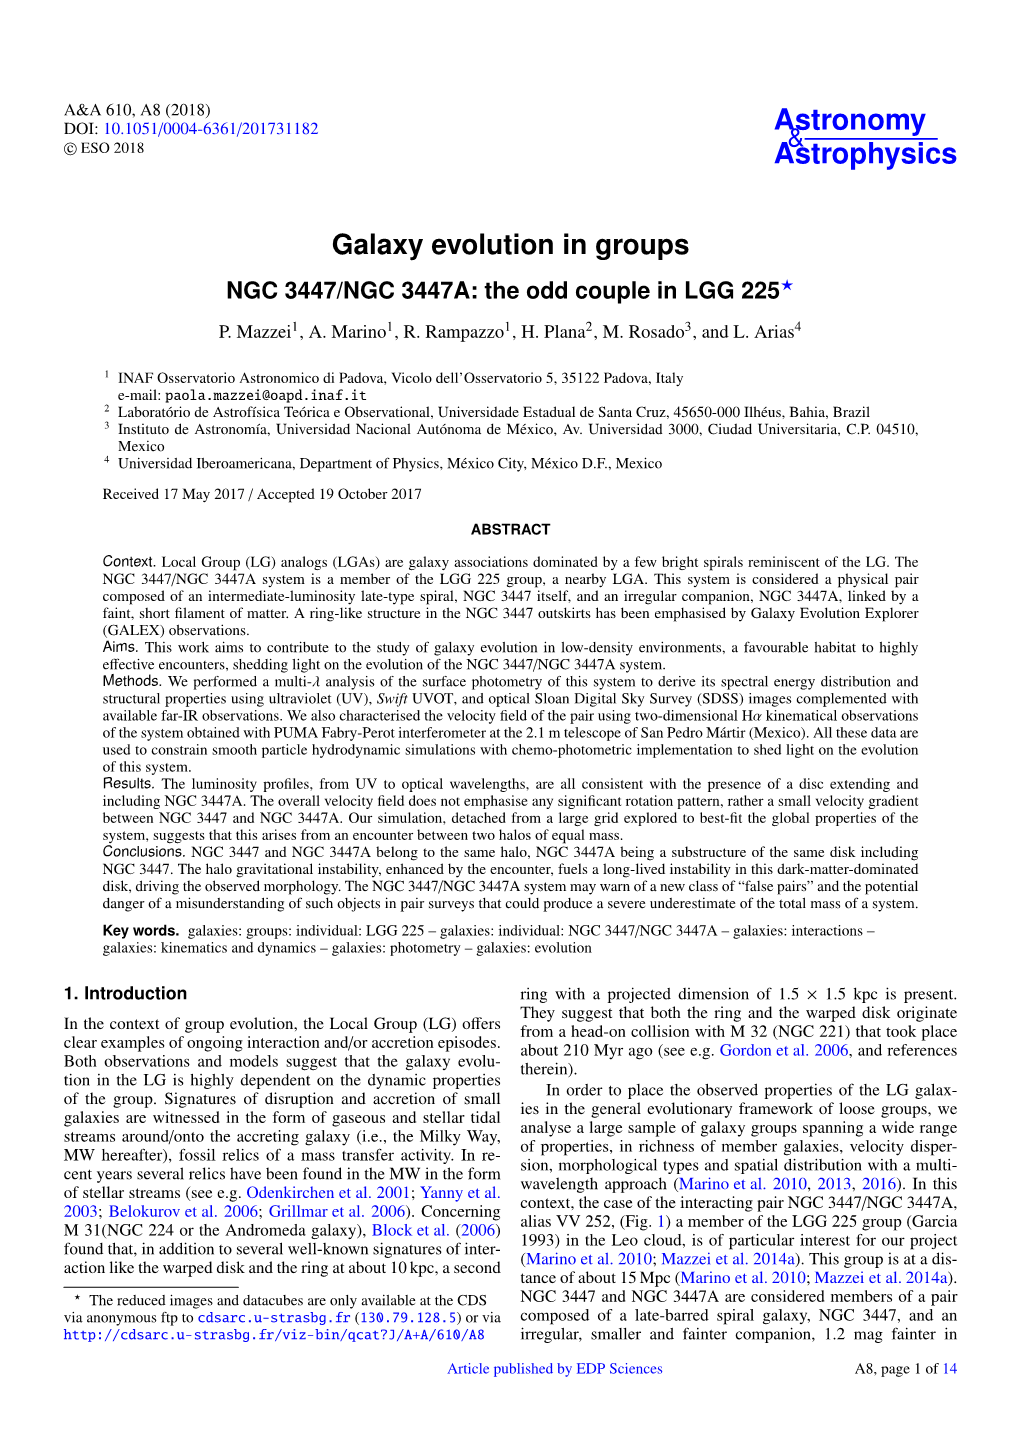 Galaxy Evolution in Groups NGC 3447/NGC 3447A: the Odd Couple in LGG 225?